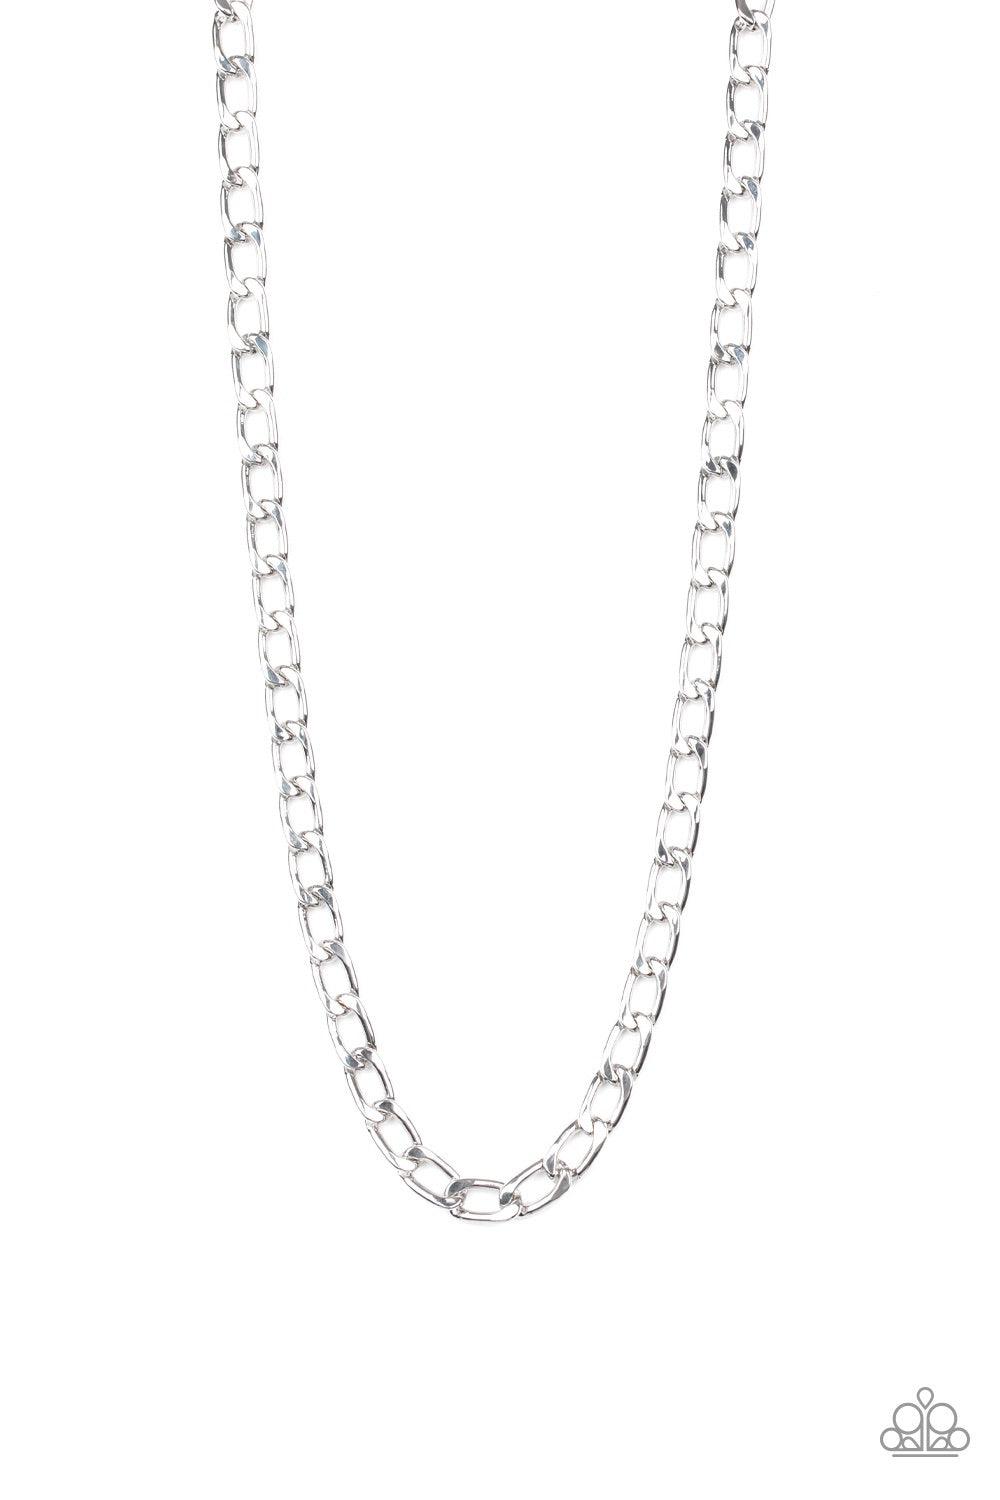 Paparazzi Accessories Big Win - Silver A thick silver beveled cable chain drapes across the chest for a classic look. Features an adjustable clasp closure. Jewelry